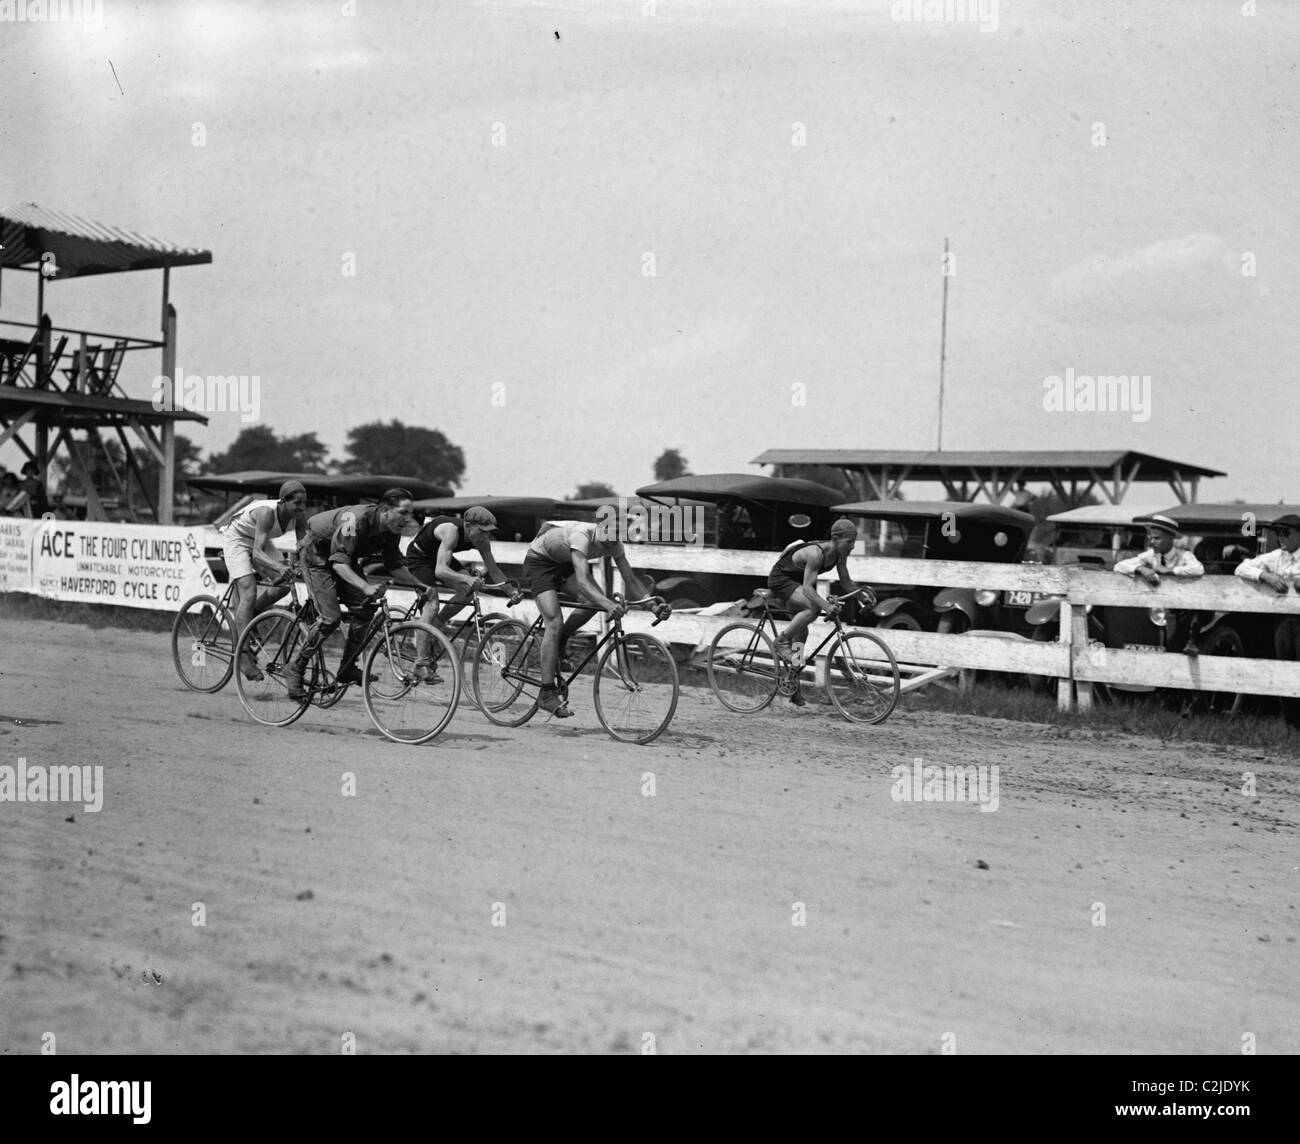 Bicycle Race on Track Stock Photo